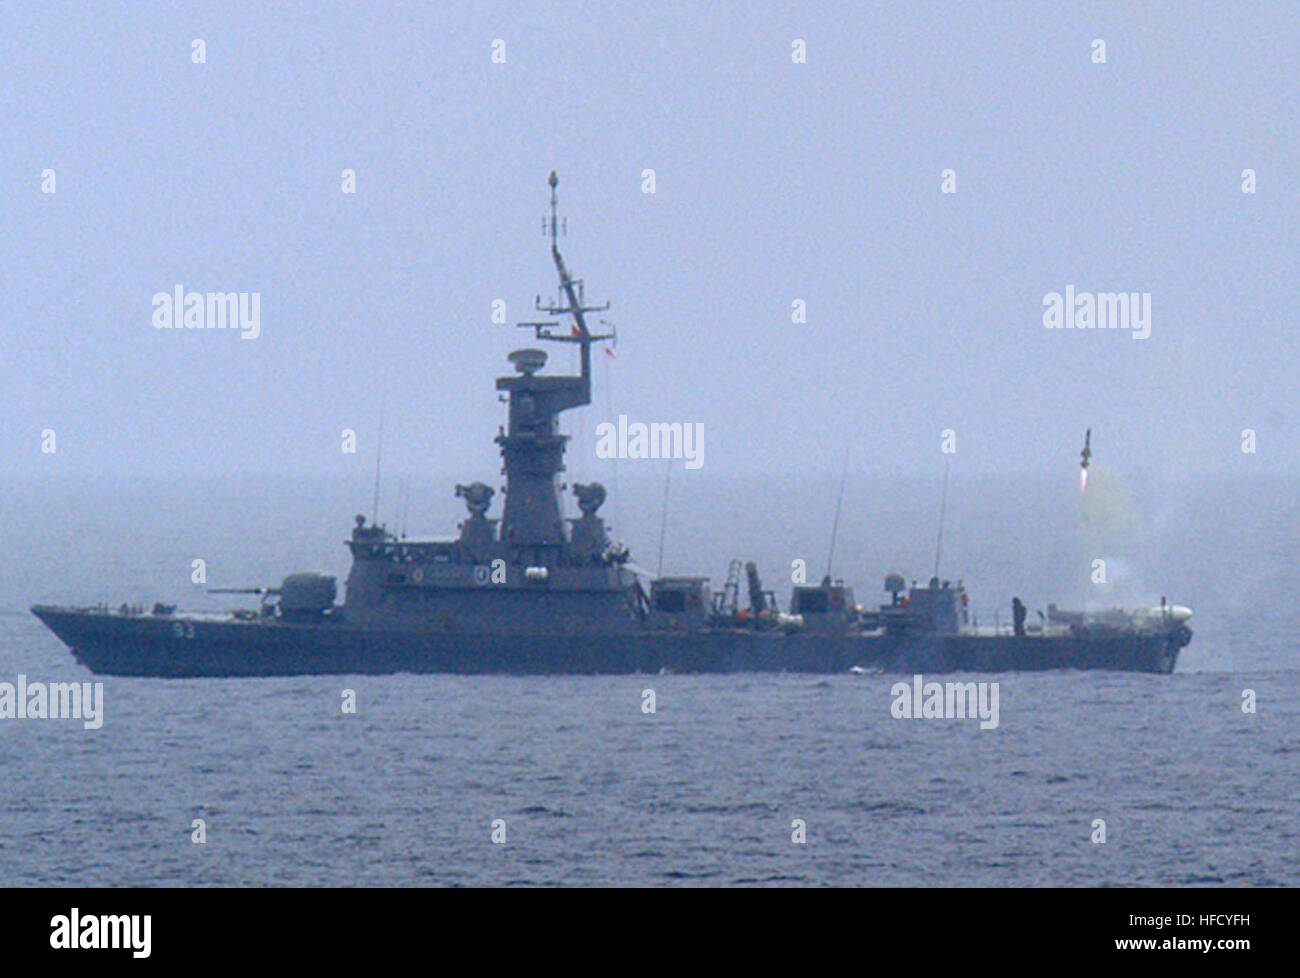 060608-N-9999A-001  South China Sea (June 8, 2006) - The Republic of Singapore Navy missile corvette RSS Vengeance launches two Barak missiles during a missile exercise in support of the Singapore phase of Cooperation Afloat Readiness and Training (CARAT). The two missiles successfully shot down two U.S. Navy BQM-74E aerial drones, launched from the dock landing ship USS Tortuga (LSD 46). CARAT is an annual series of bilateral maritime training exercises between the United States and six Southeast Asia nations designed to build relationships and enhance the operational readiness of the partici Stock Photo